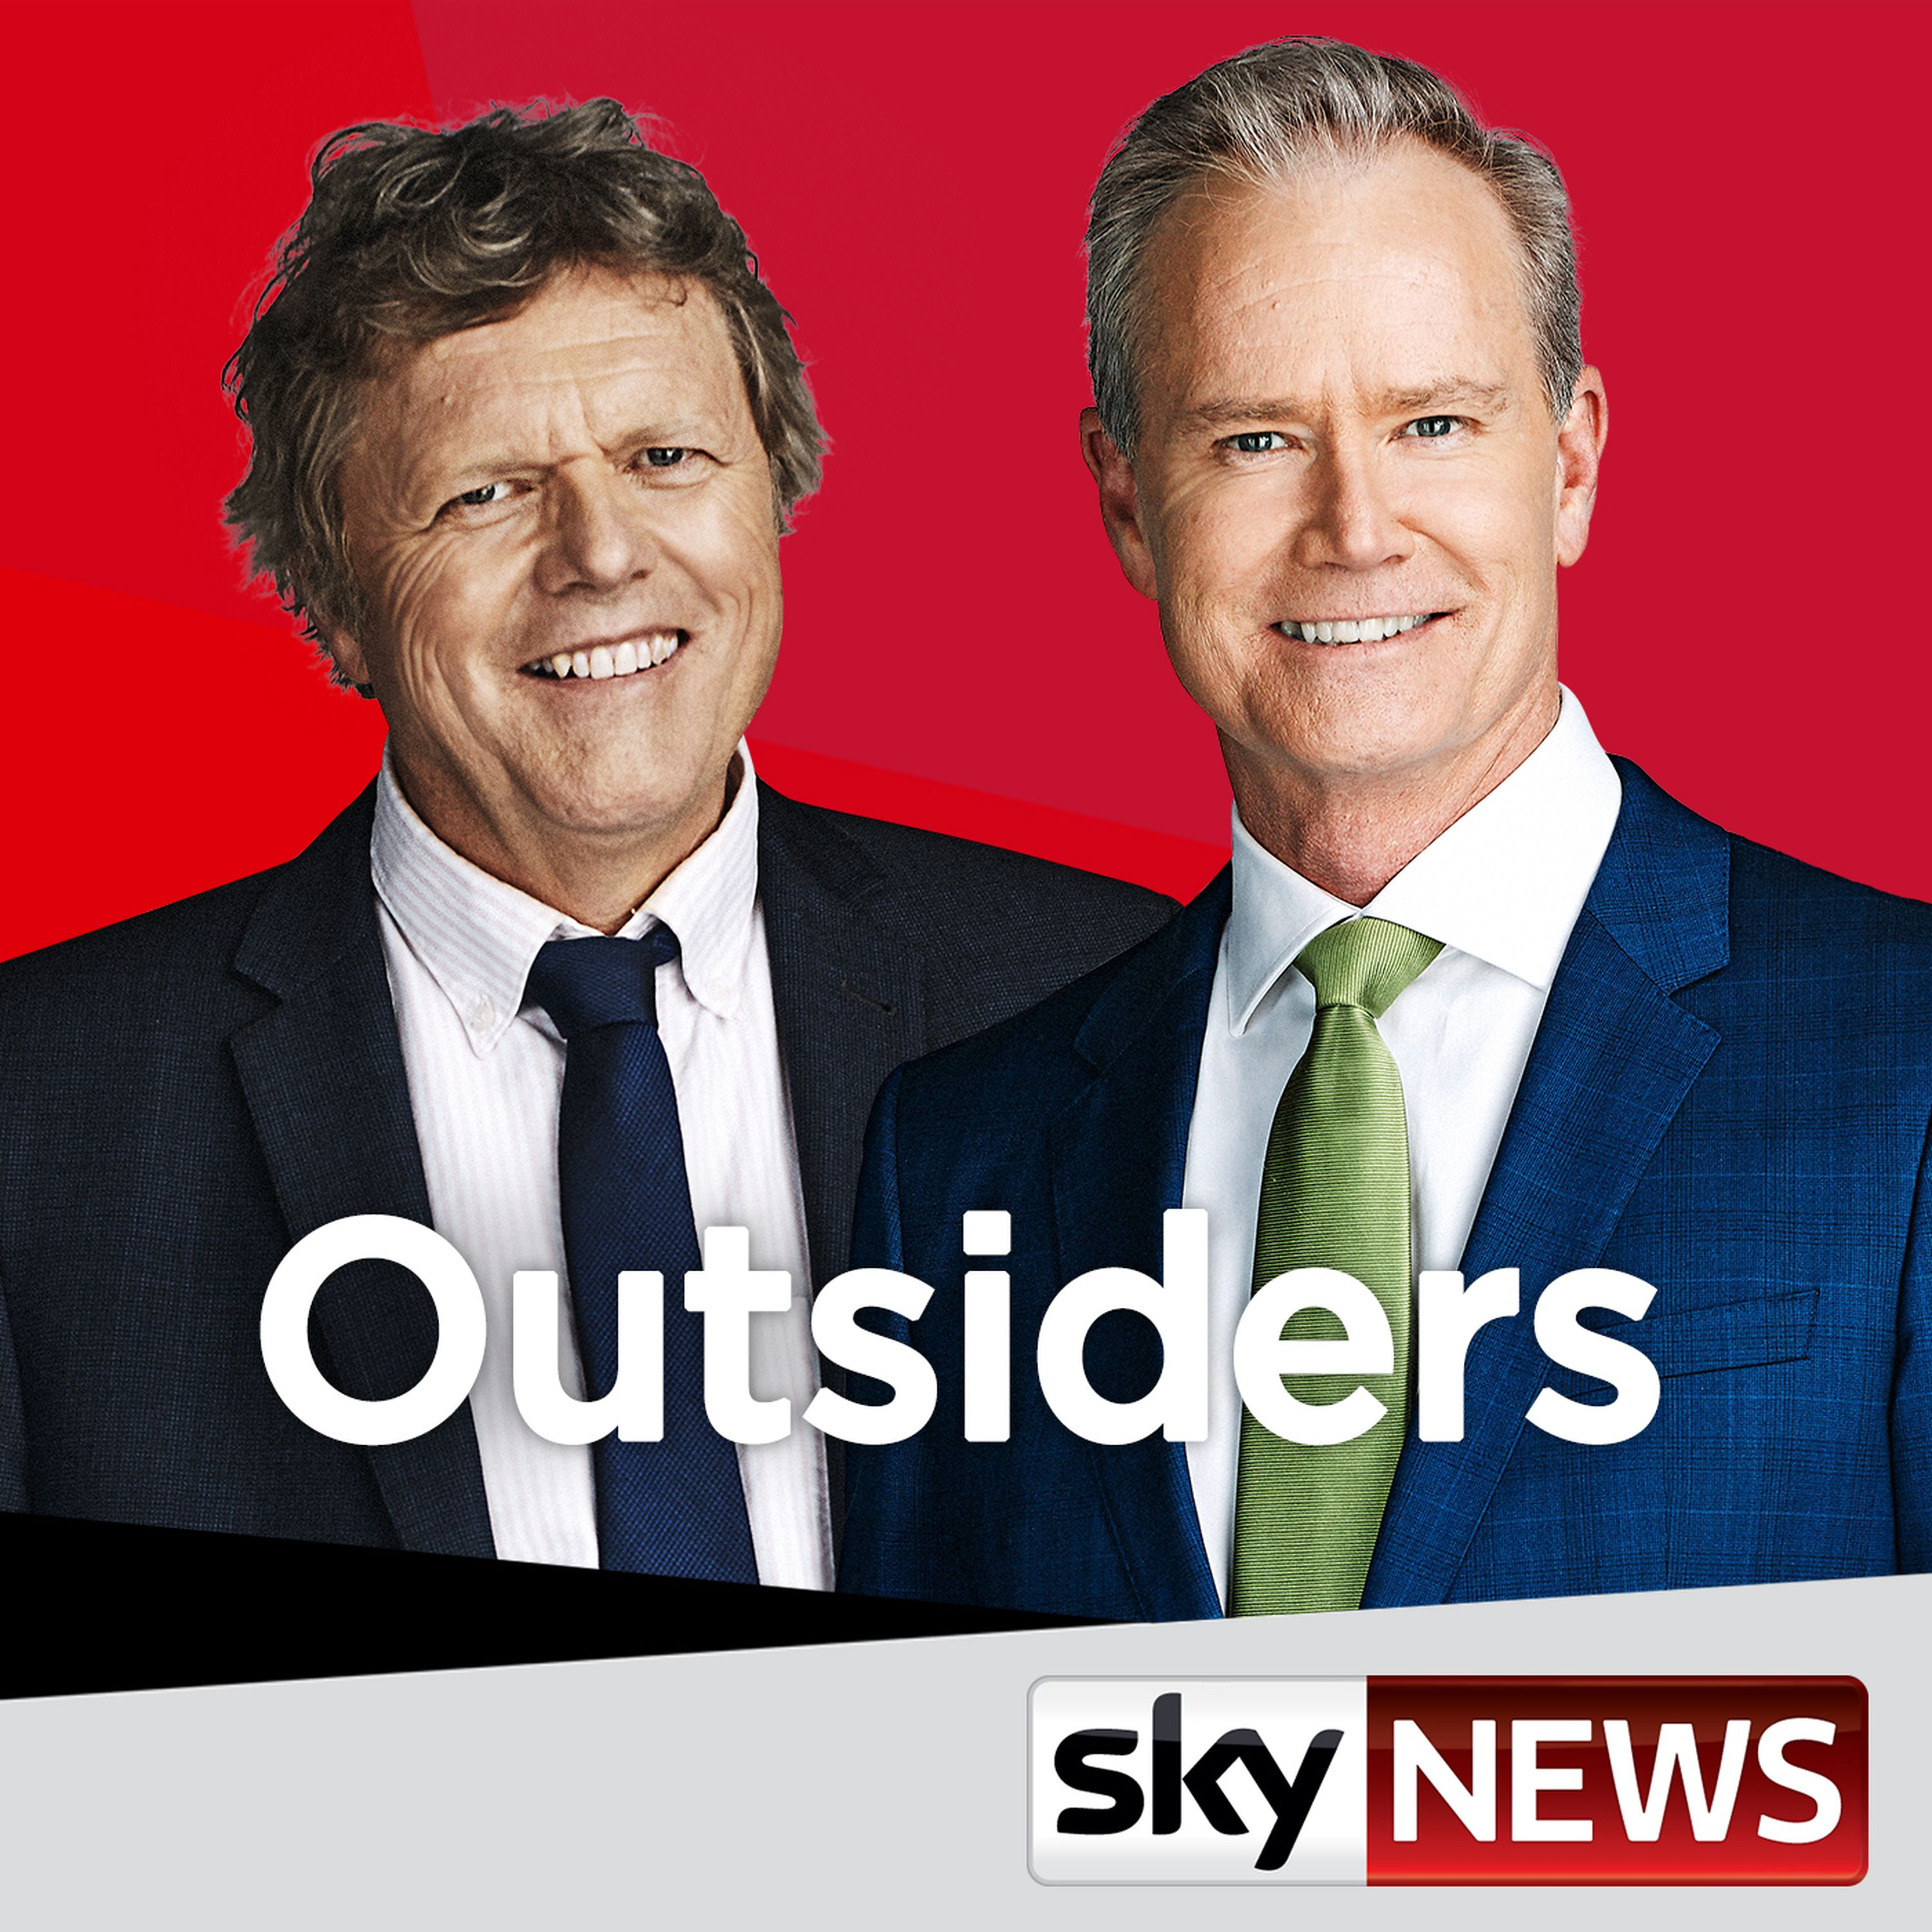 Outsiders, Monday 22nd October